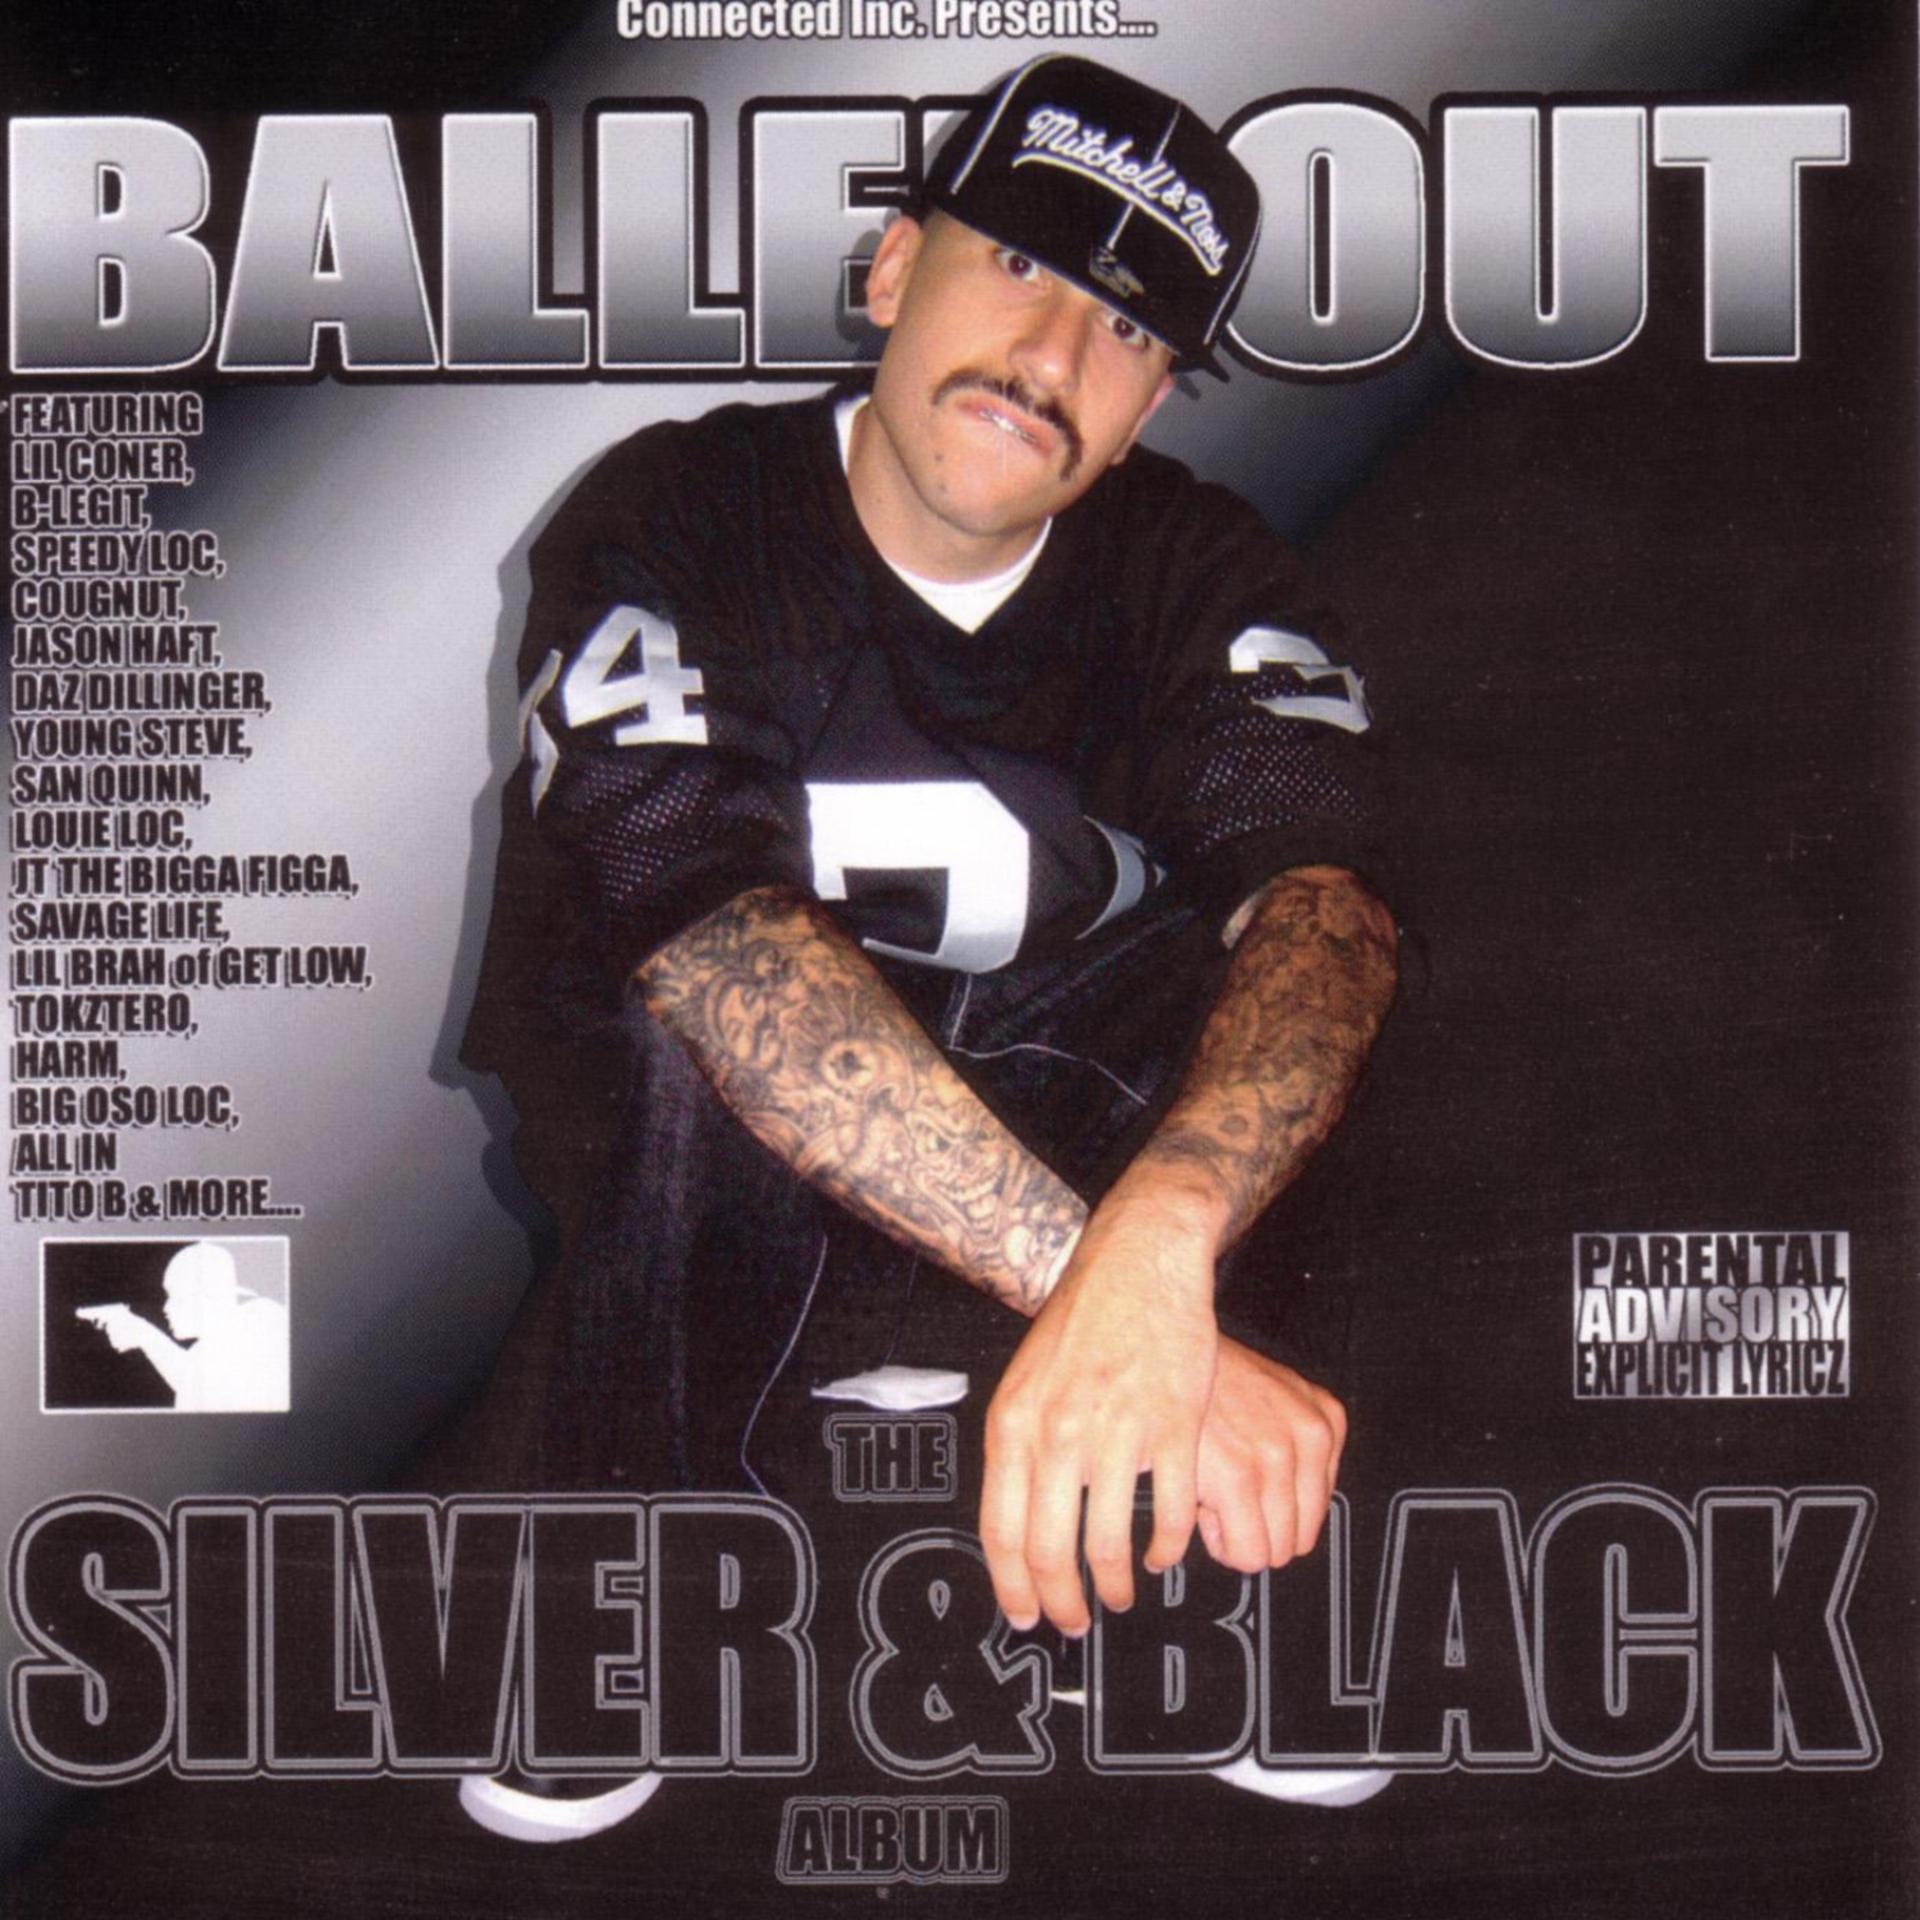 Постер альбома Connected Inc. Presents... Balled Out, The Silver And Black Album